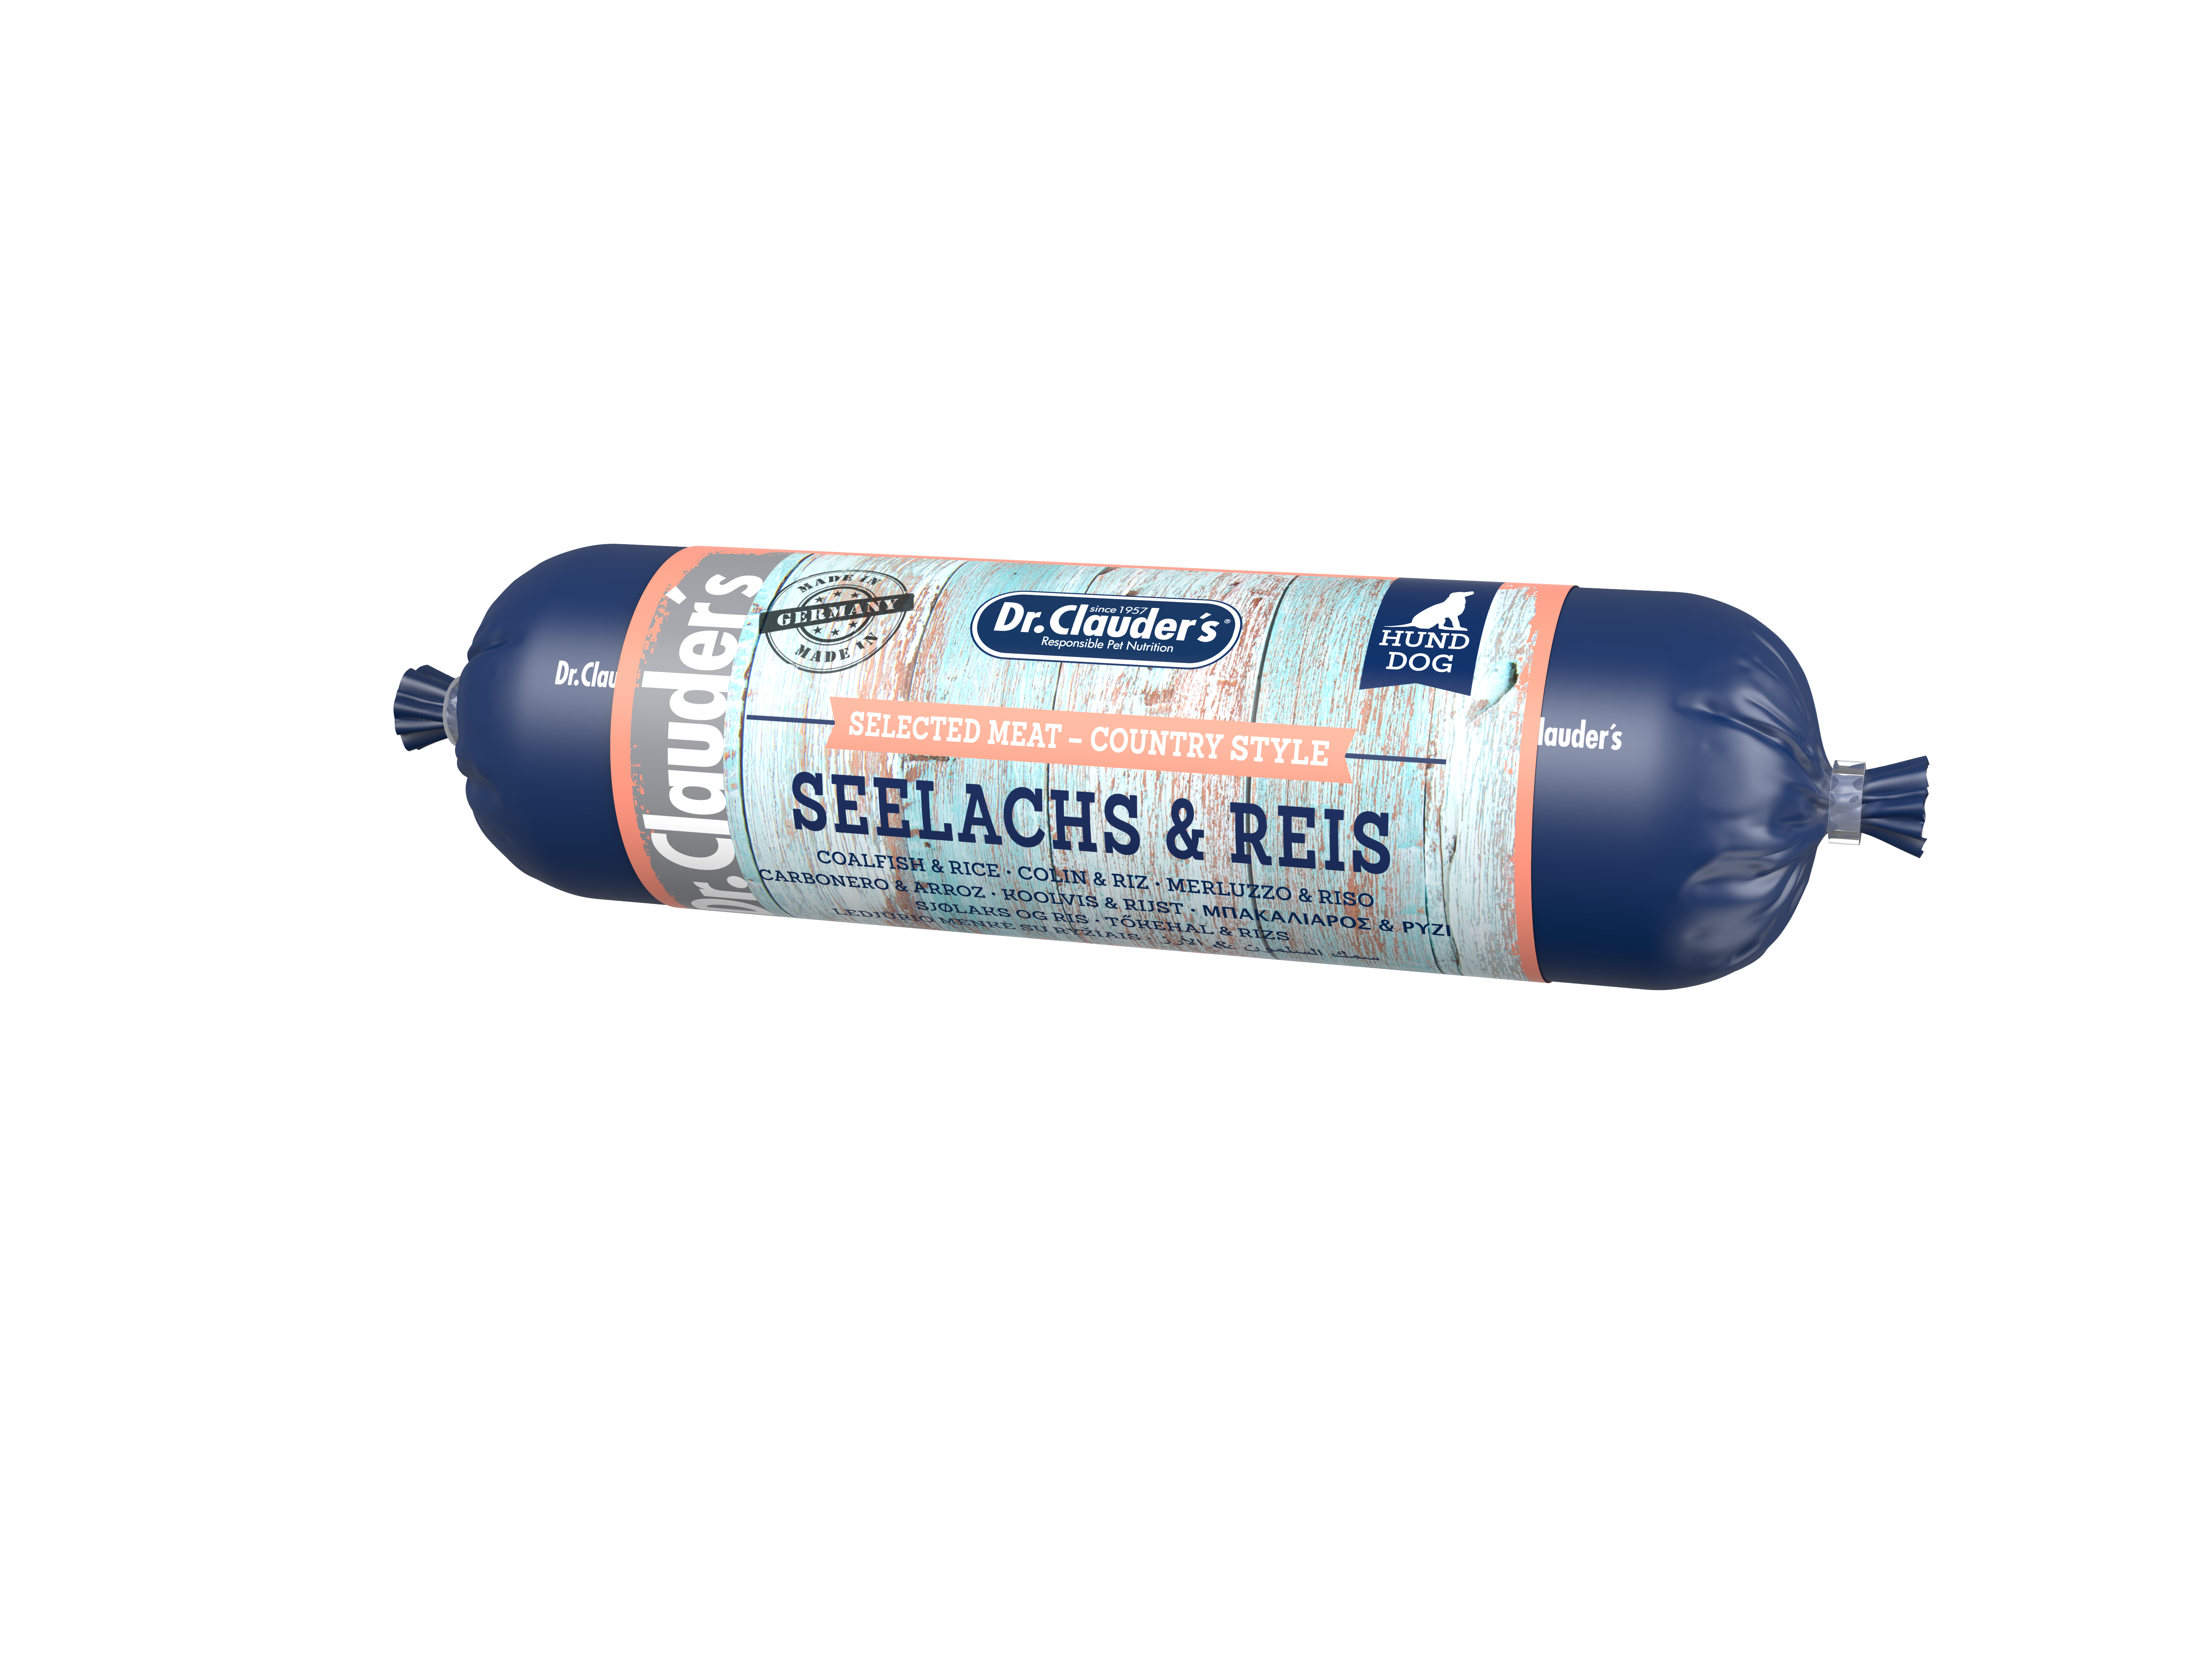 Dr. Clauders Selected Meat Country Style Seelachs & Reis 800g